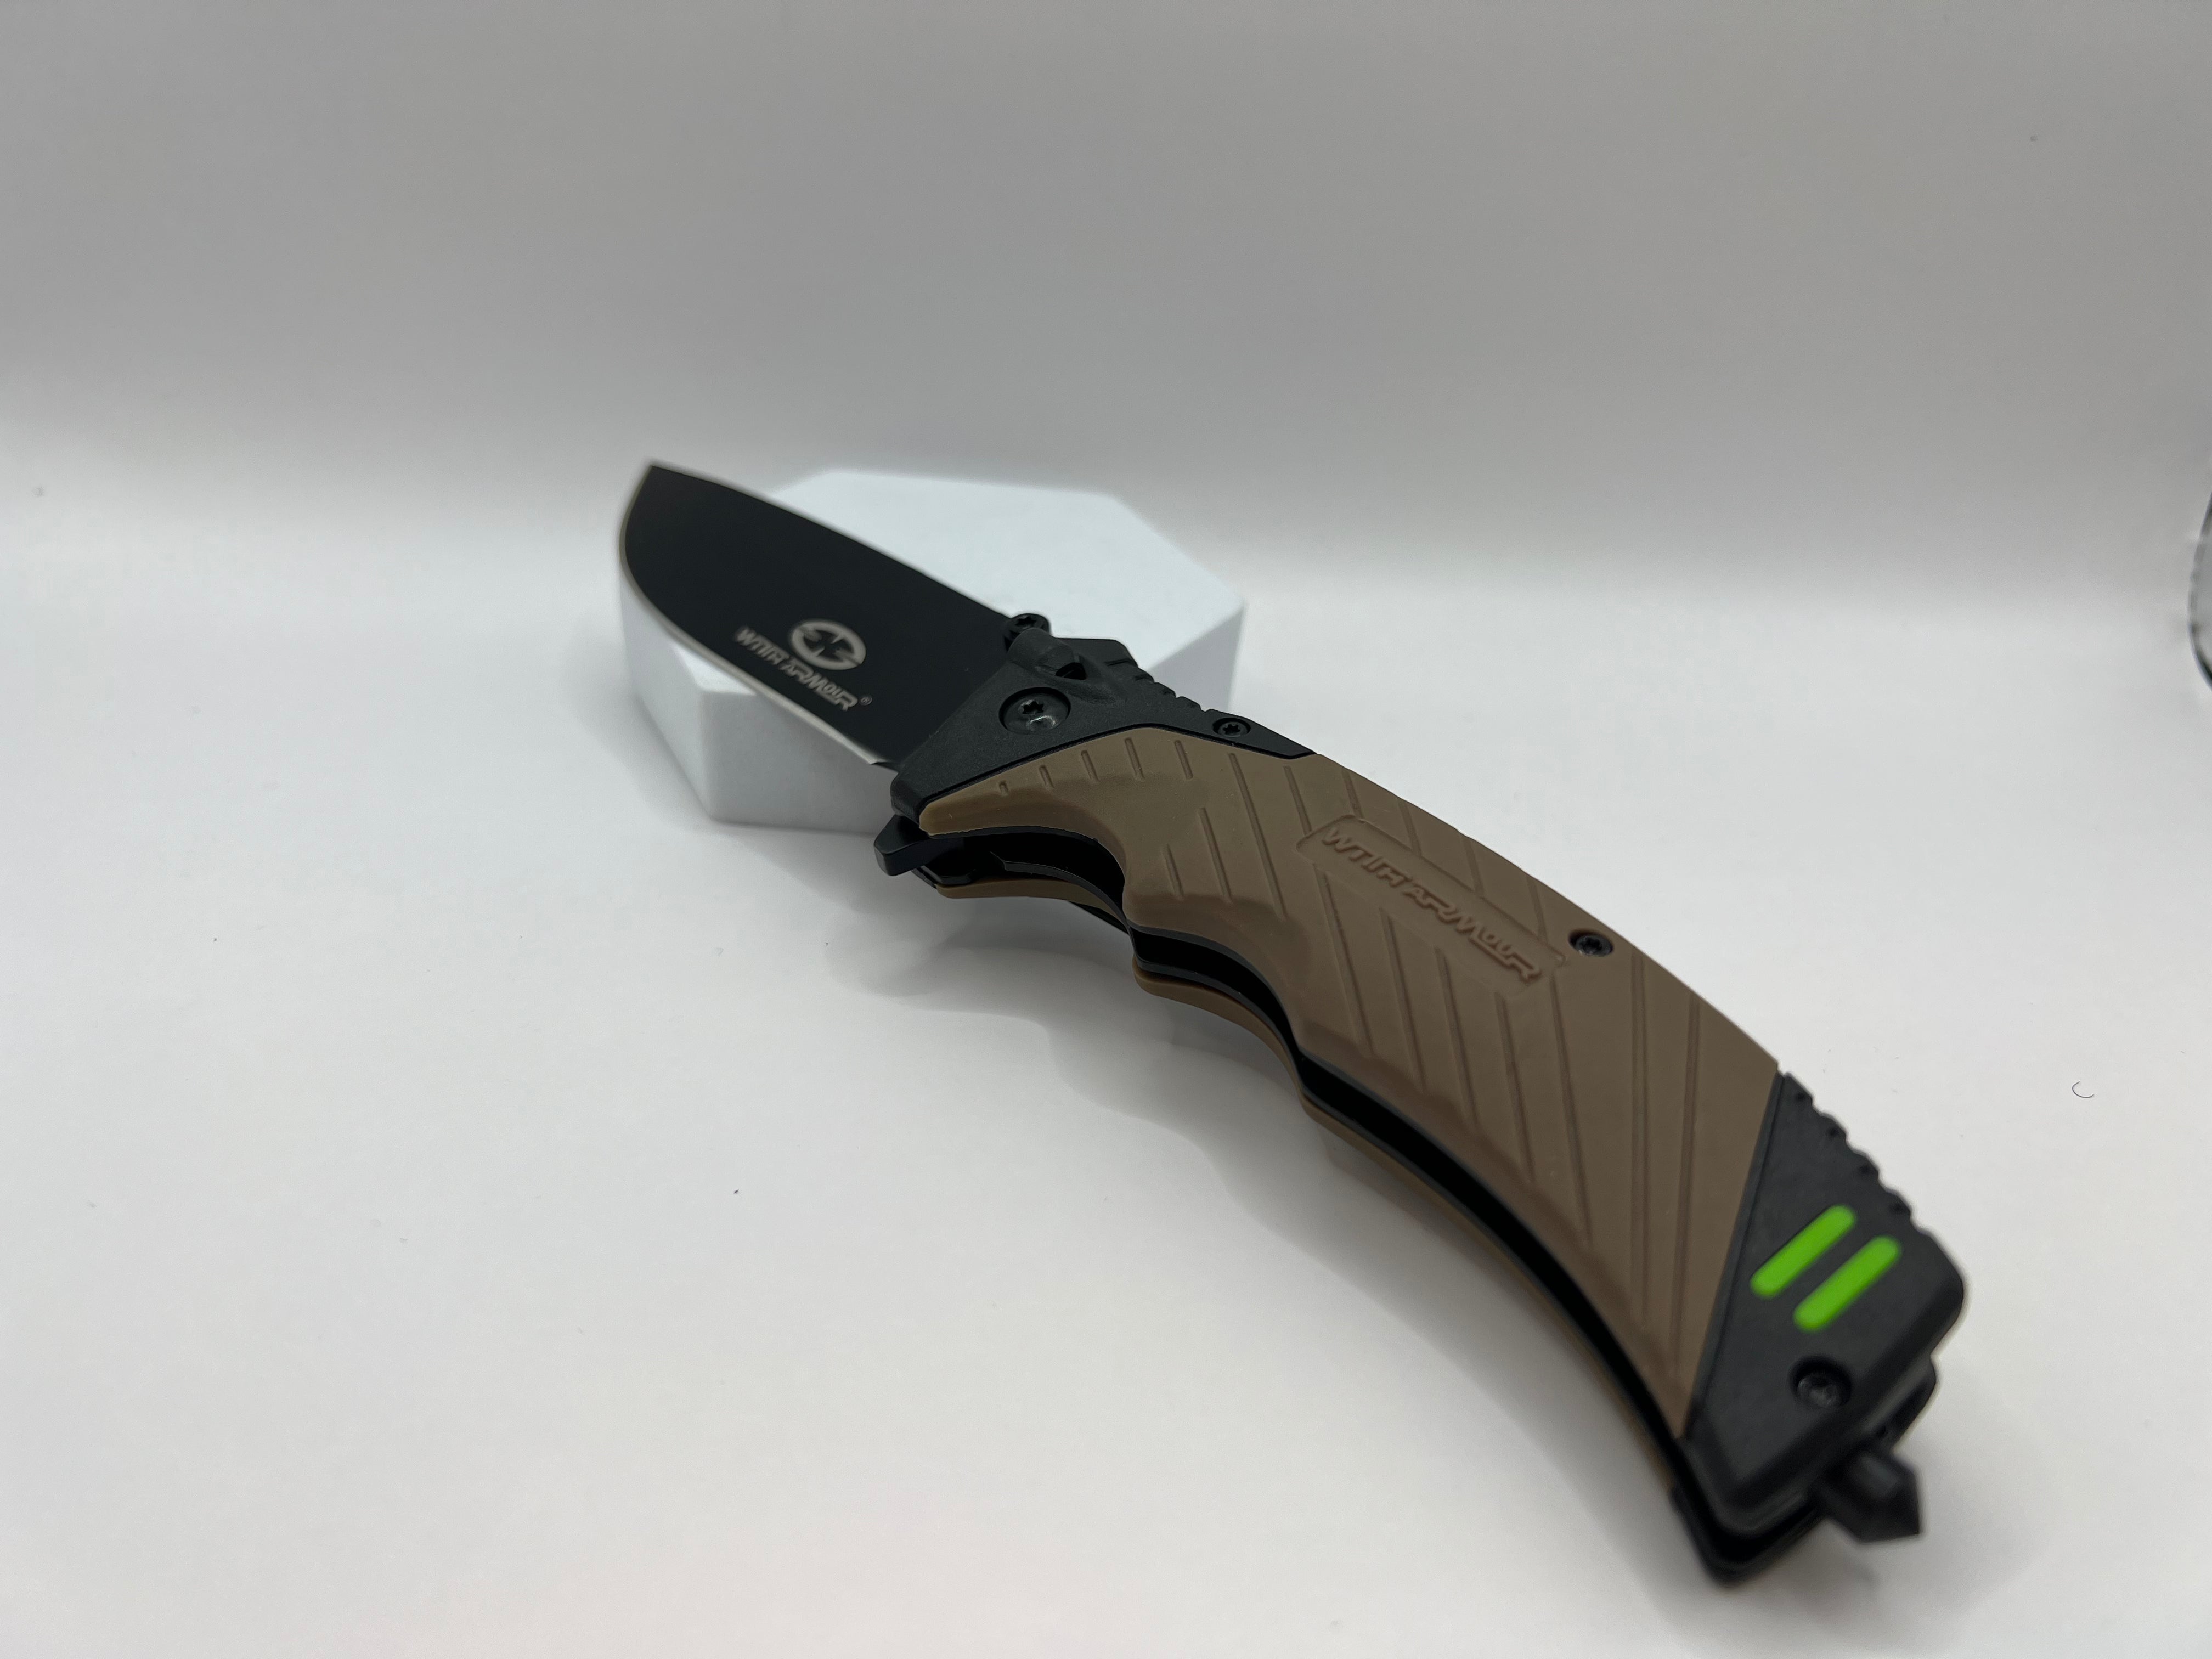 The Nightingale - Robust pocket knife for versatile inserts